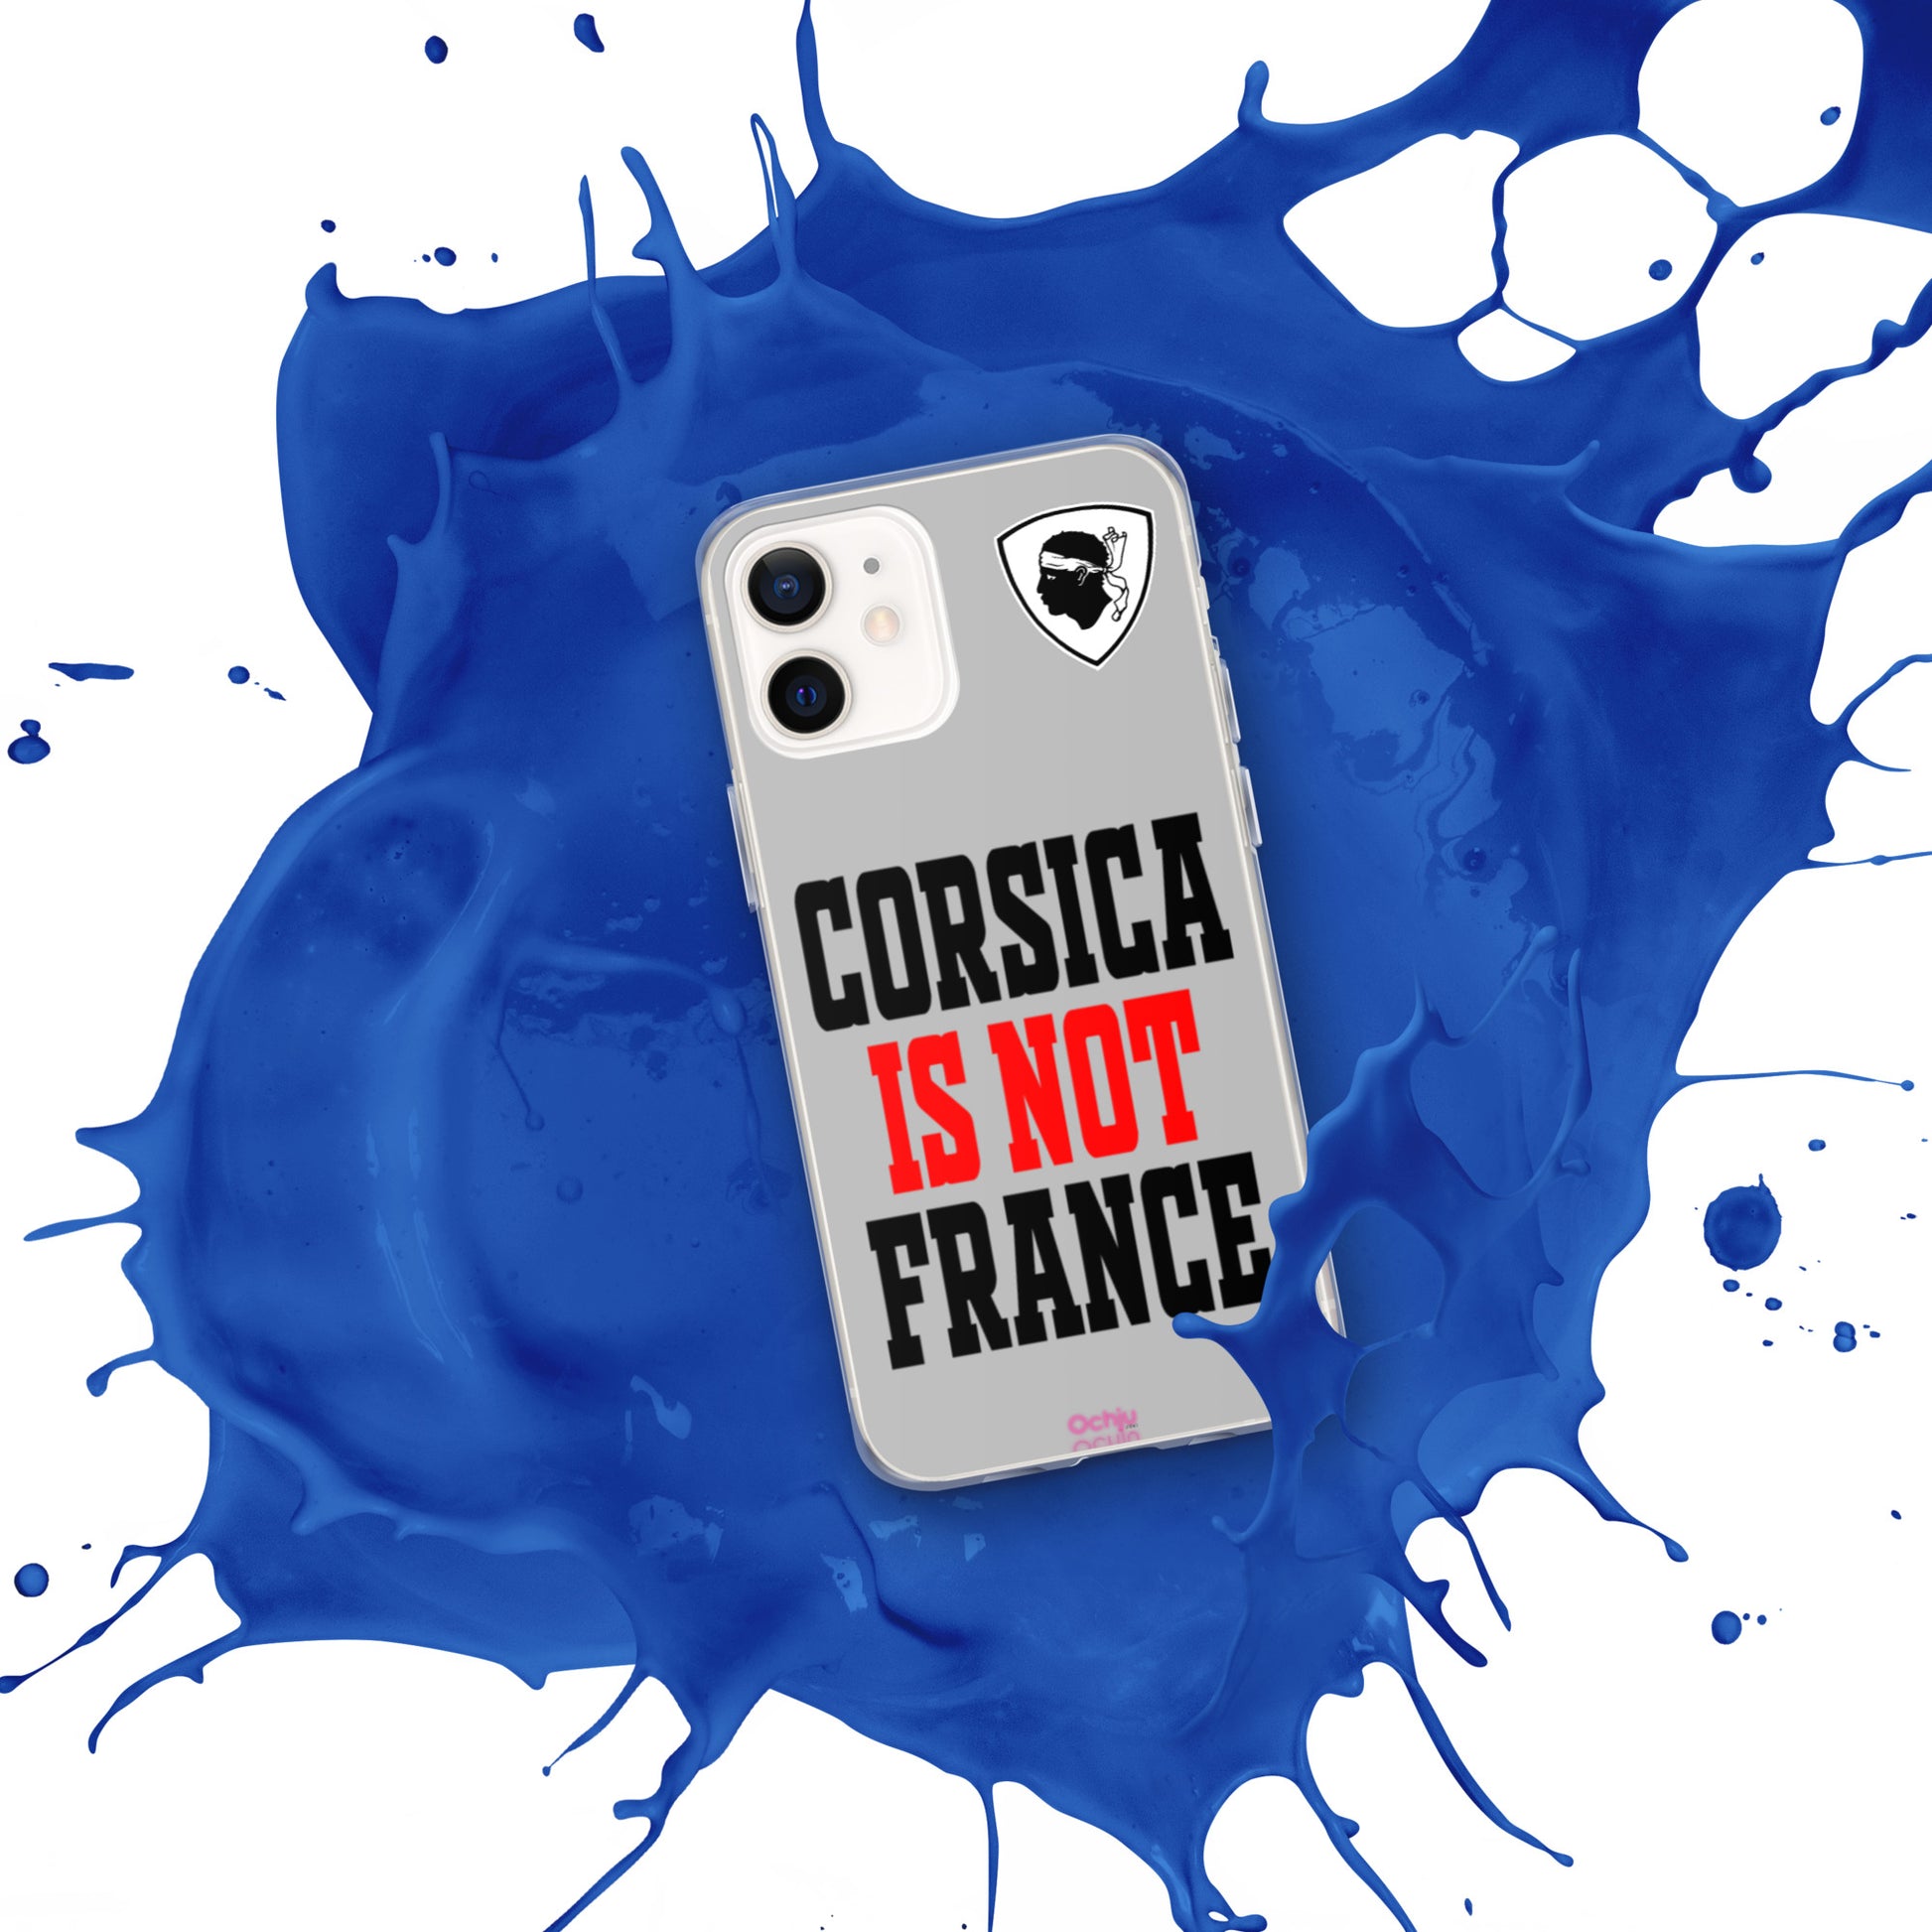 Coque pour iPhone Corsica is not France - Ochju Ochju iPhone 12 Ochju Coque pour iPhone Corsica is not France